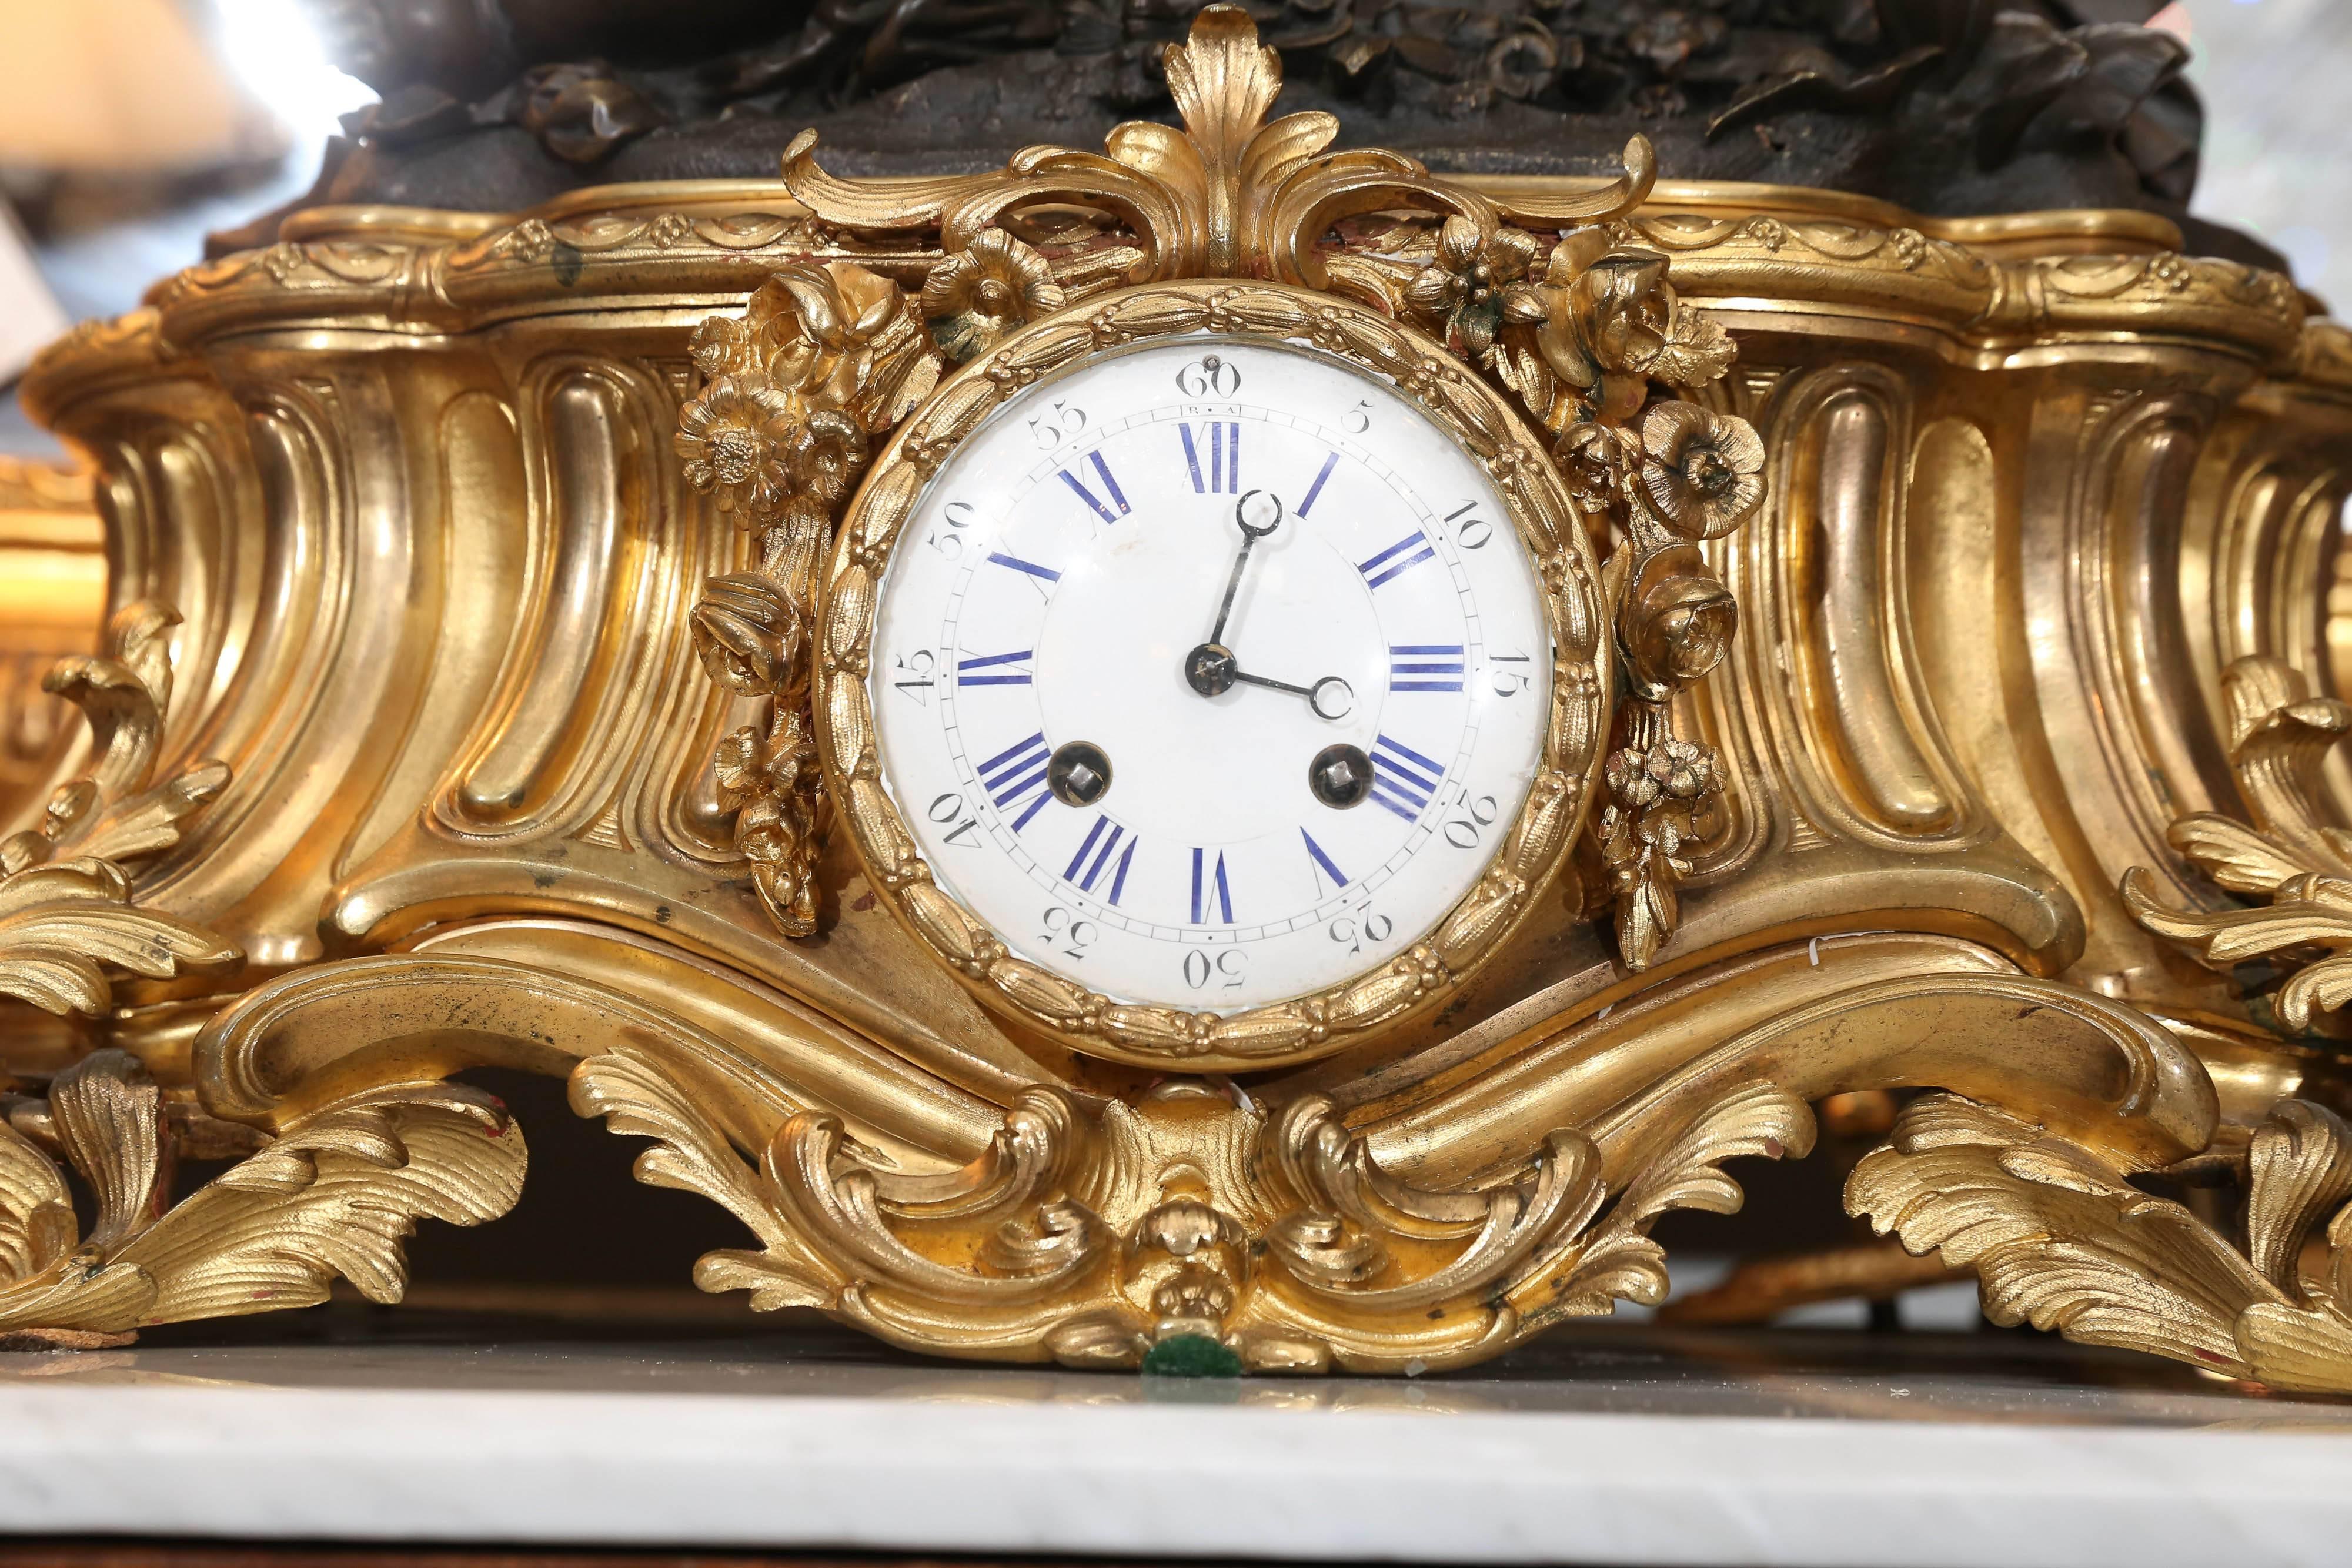 Lovely and large clock depicting a playful putti resting on top of a gilt
bronze base. The putti is reaching for a butterfly amidst a group of flowers
the clock has a white enamel face with blue numerals. It is in working
Order and had the